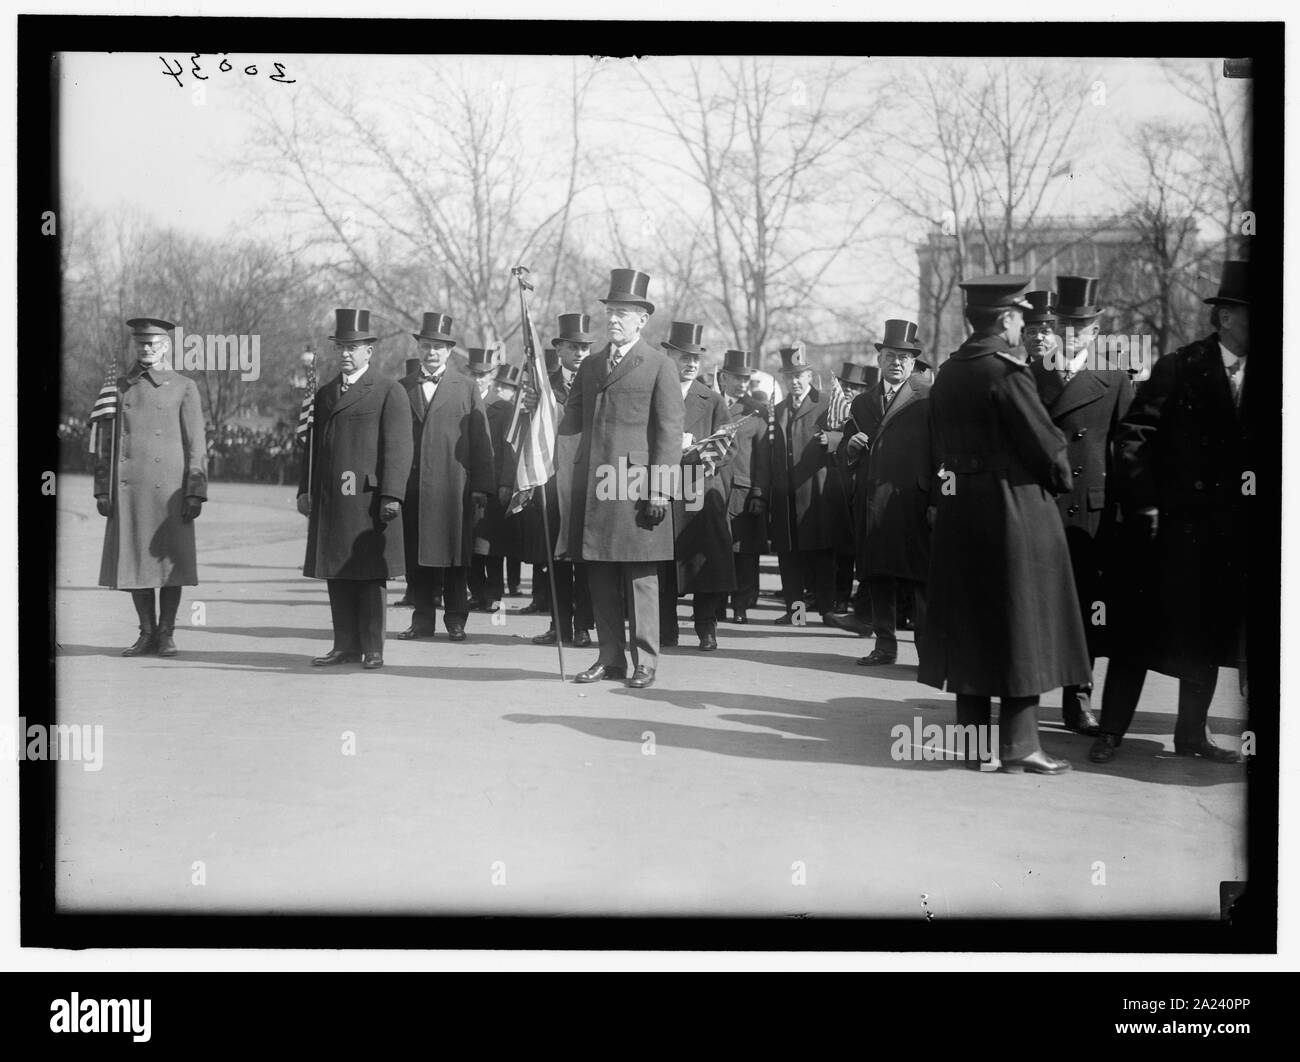 PARADES. WELCOME HOME PARADE FOR PRESIDENT WILSON; HARPER, ROBERT N., D.C. BANKER; GUDE, WILLIAM F., OF D.C. Stock Photo